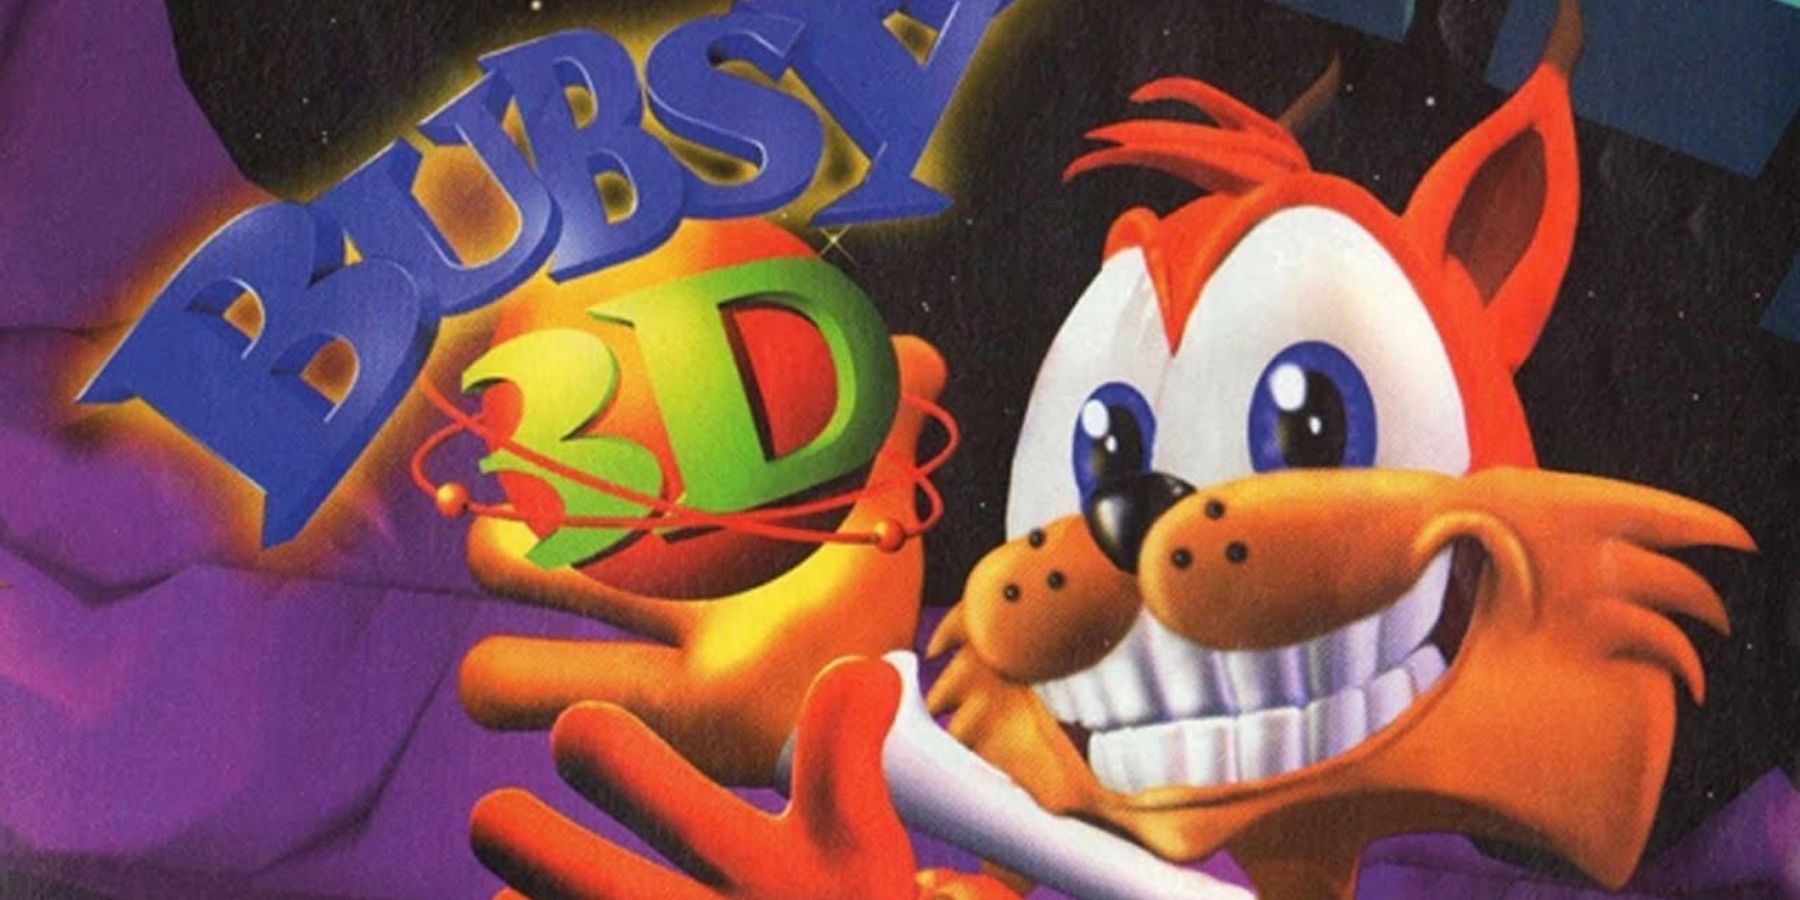 bubsy 3d voice acting